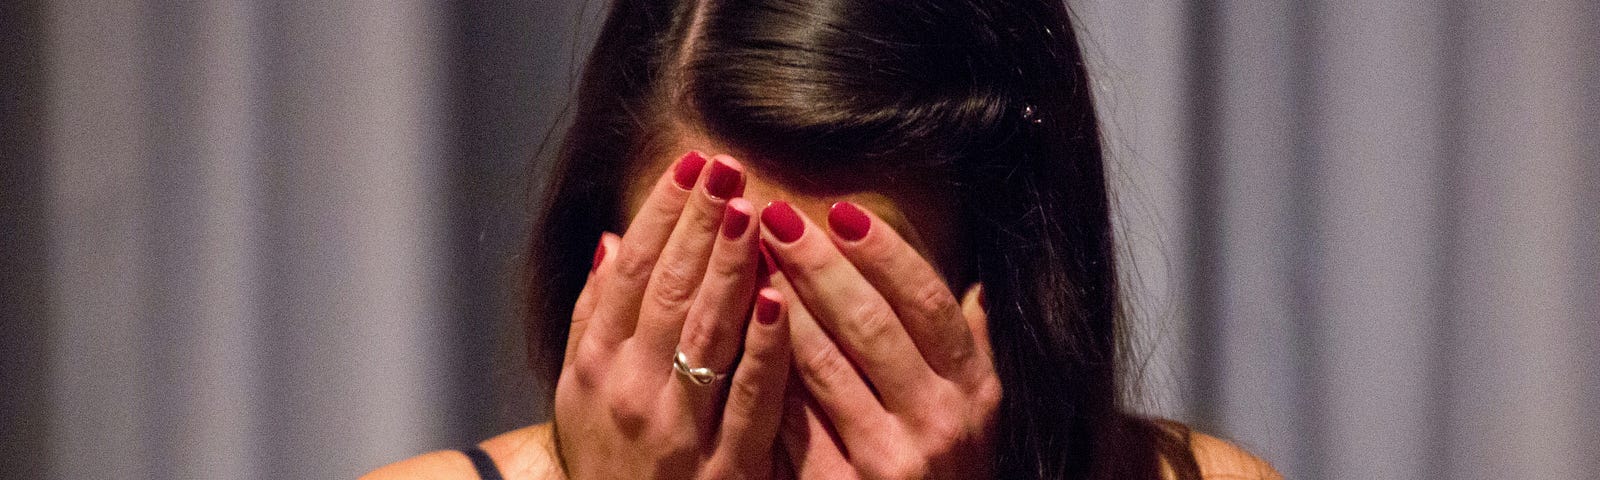 Woman hiding her face with her hands